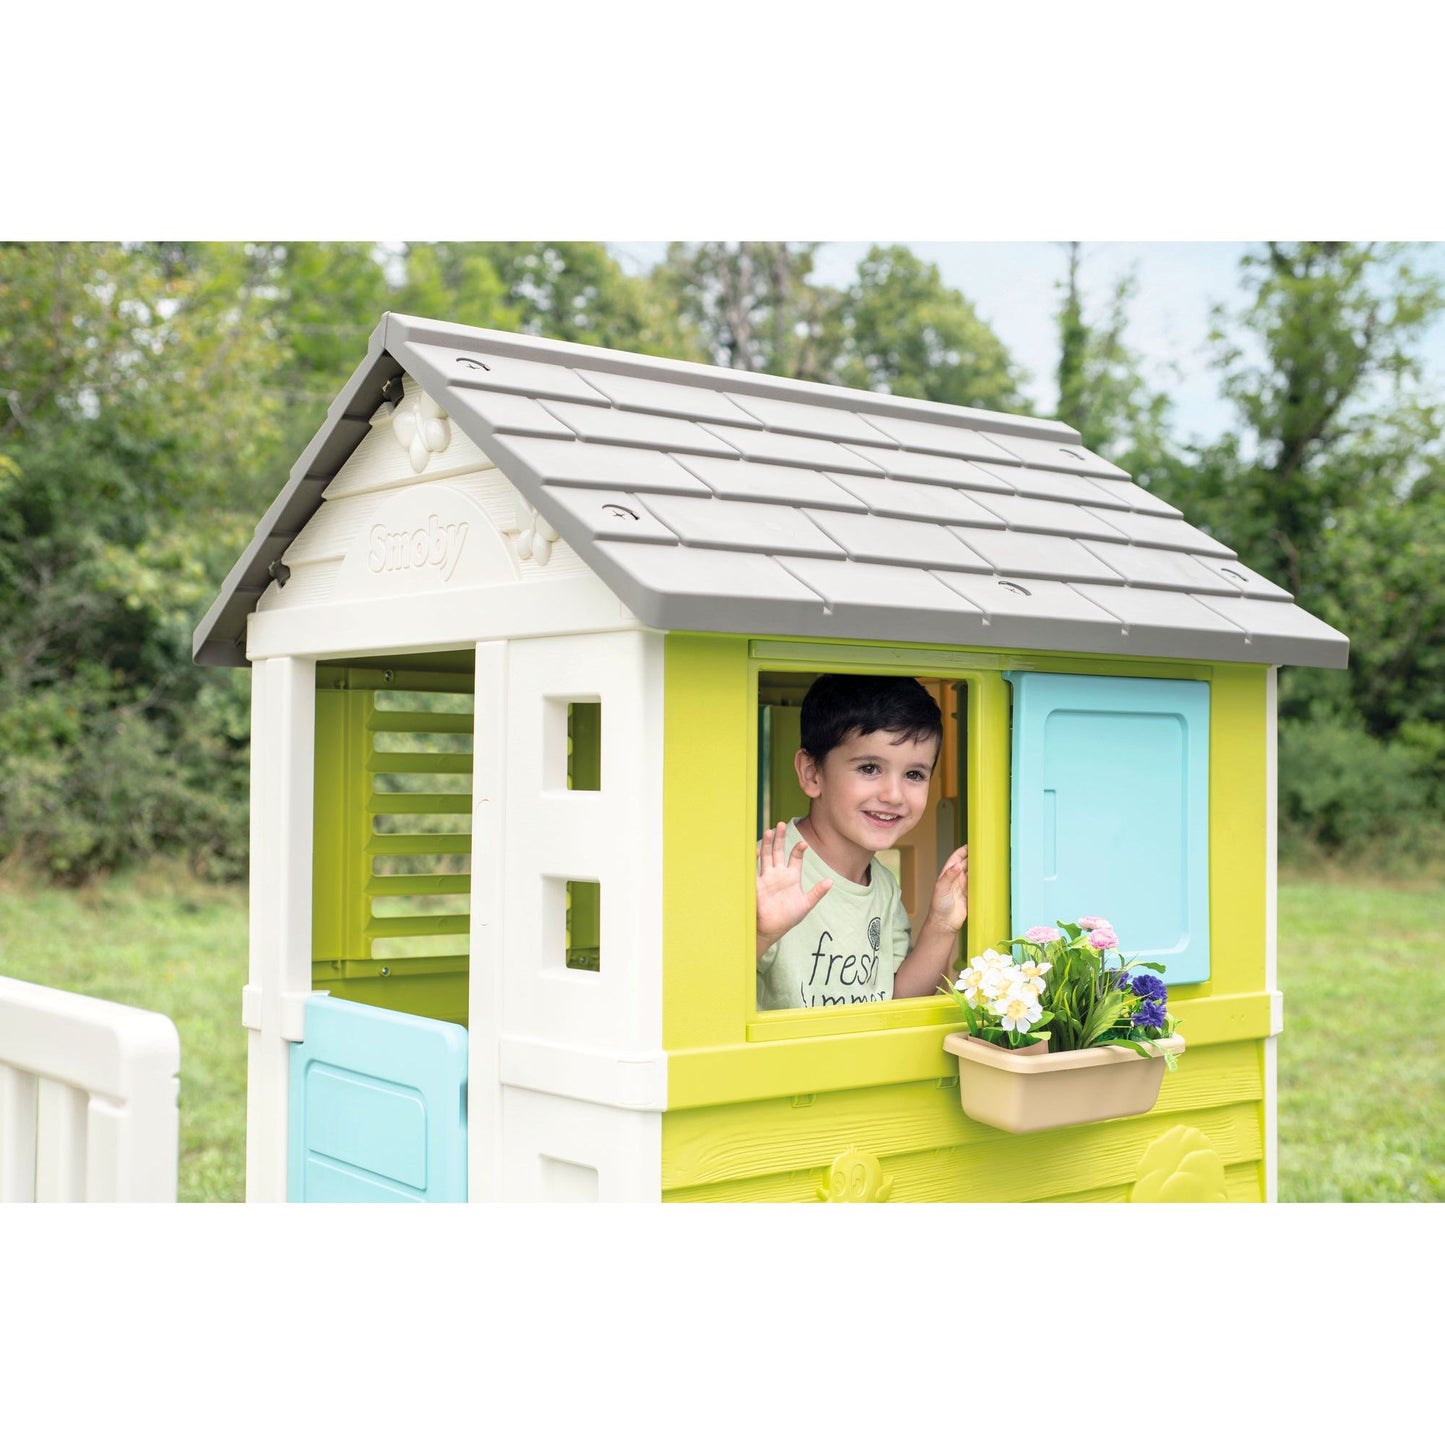 Smoby House On Stilts Playhouse & Accessories - 3 Years +